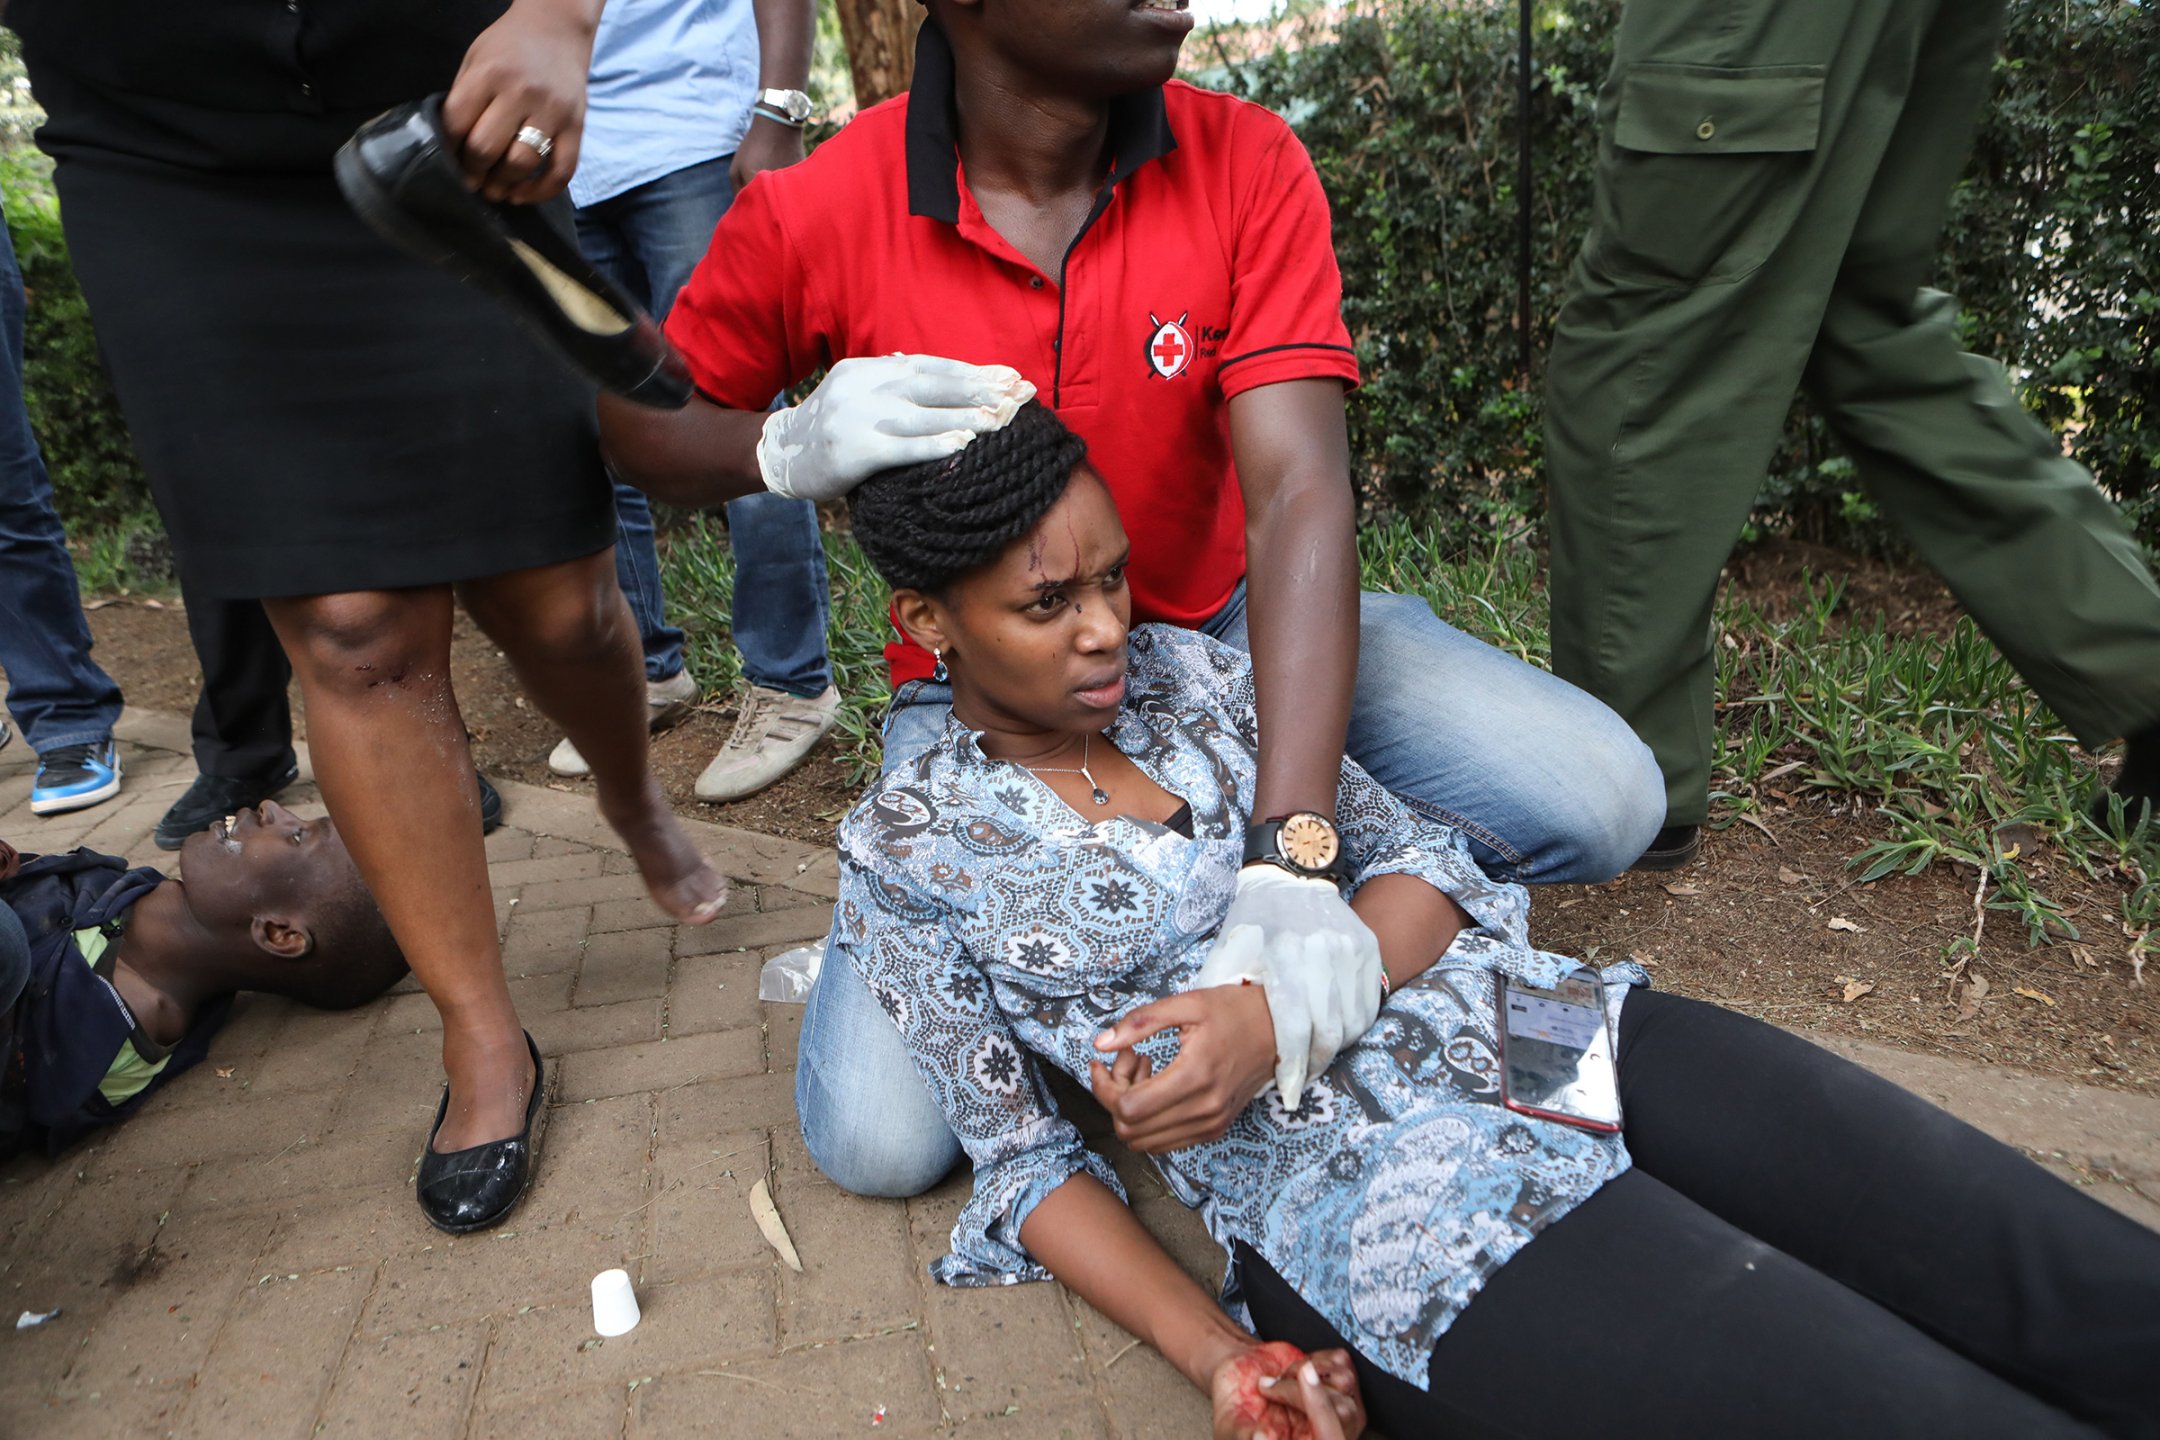 A woman receives medical attention after an apparent terrorist attack on an upscale hotel in Nairobi on Jan. 15. More than a dozen people were killed.